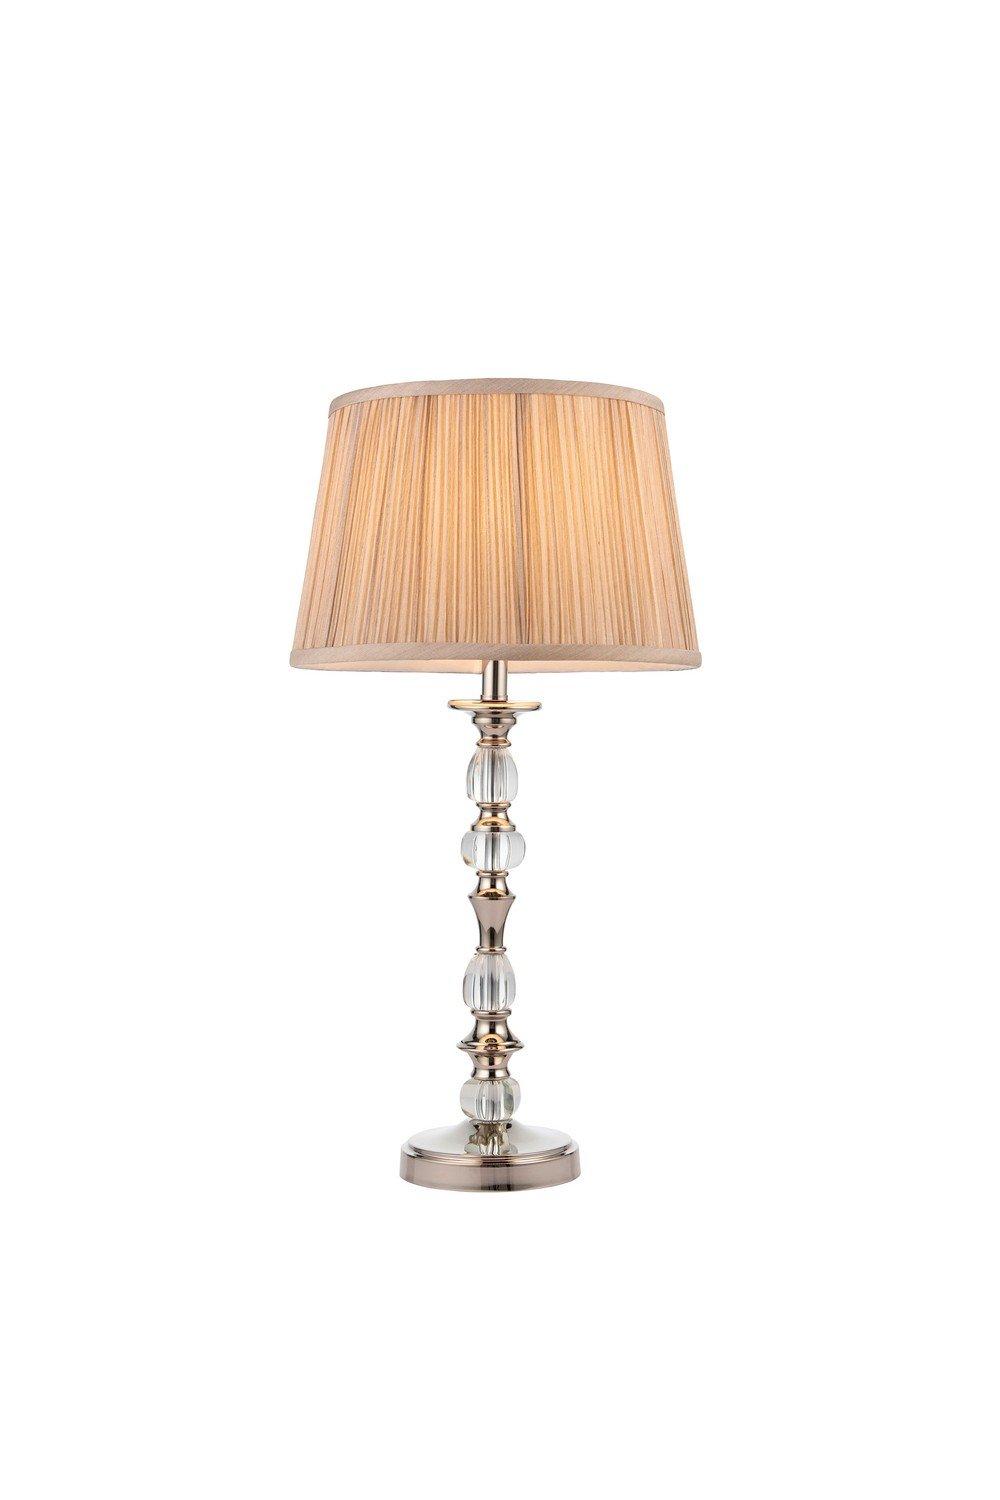 Polina 1 Light Medium Table Lamp Polished Nickel Plate with Beige Shade E14